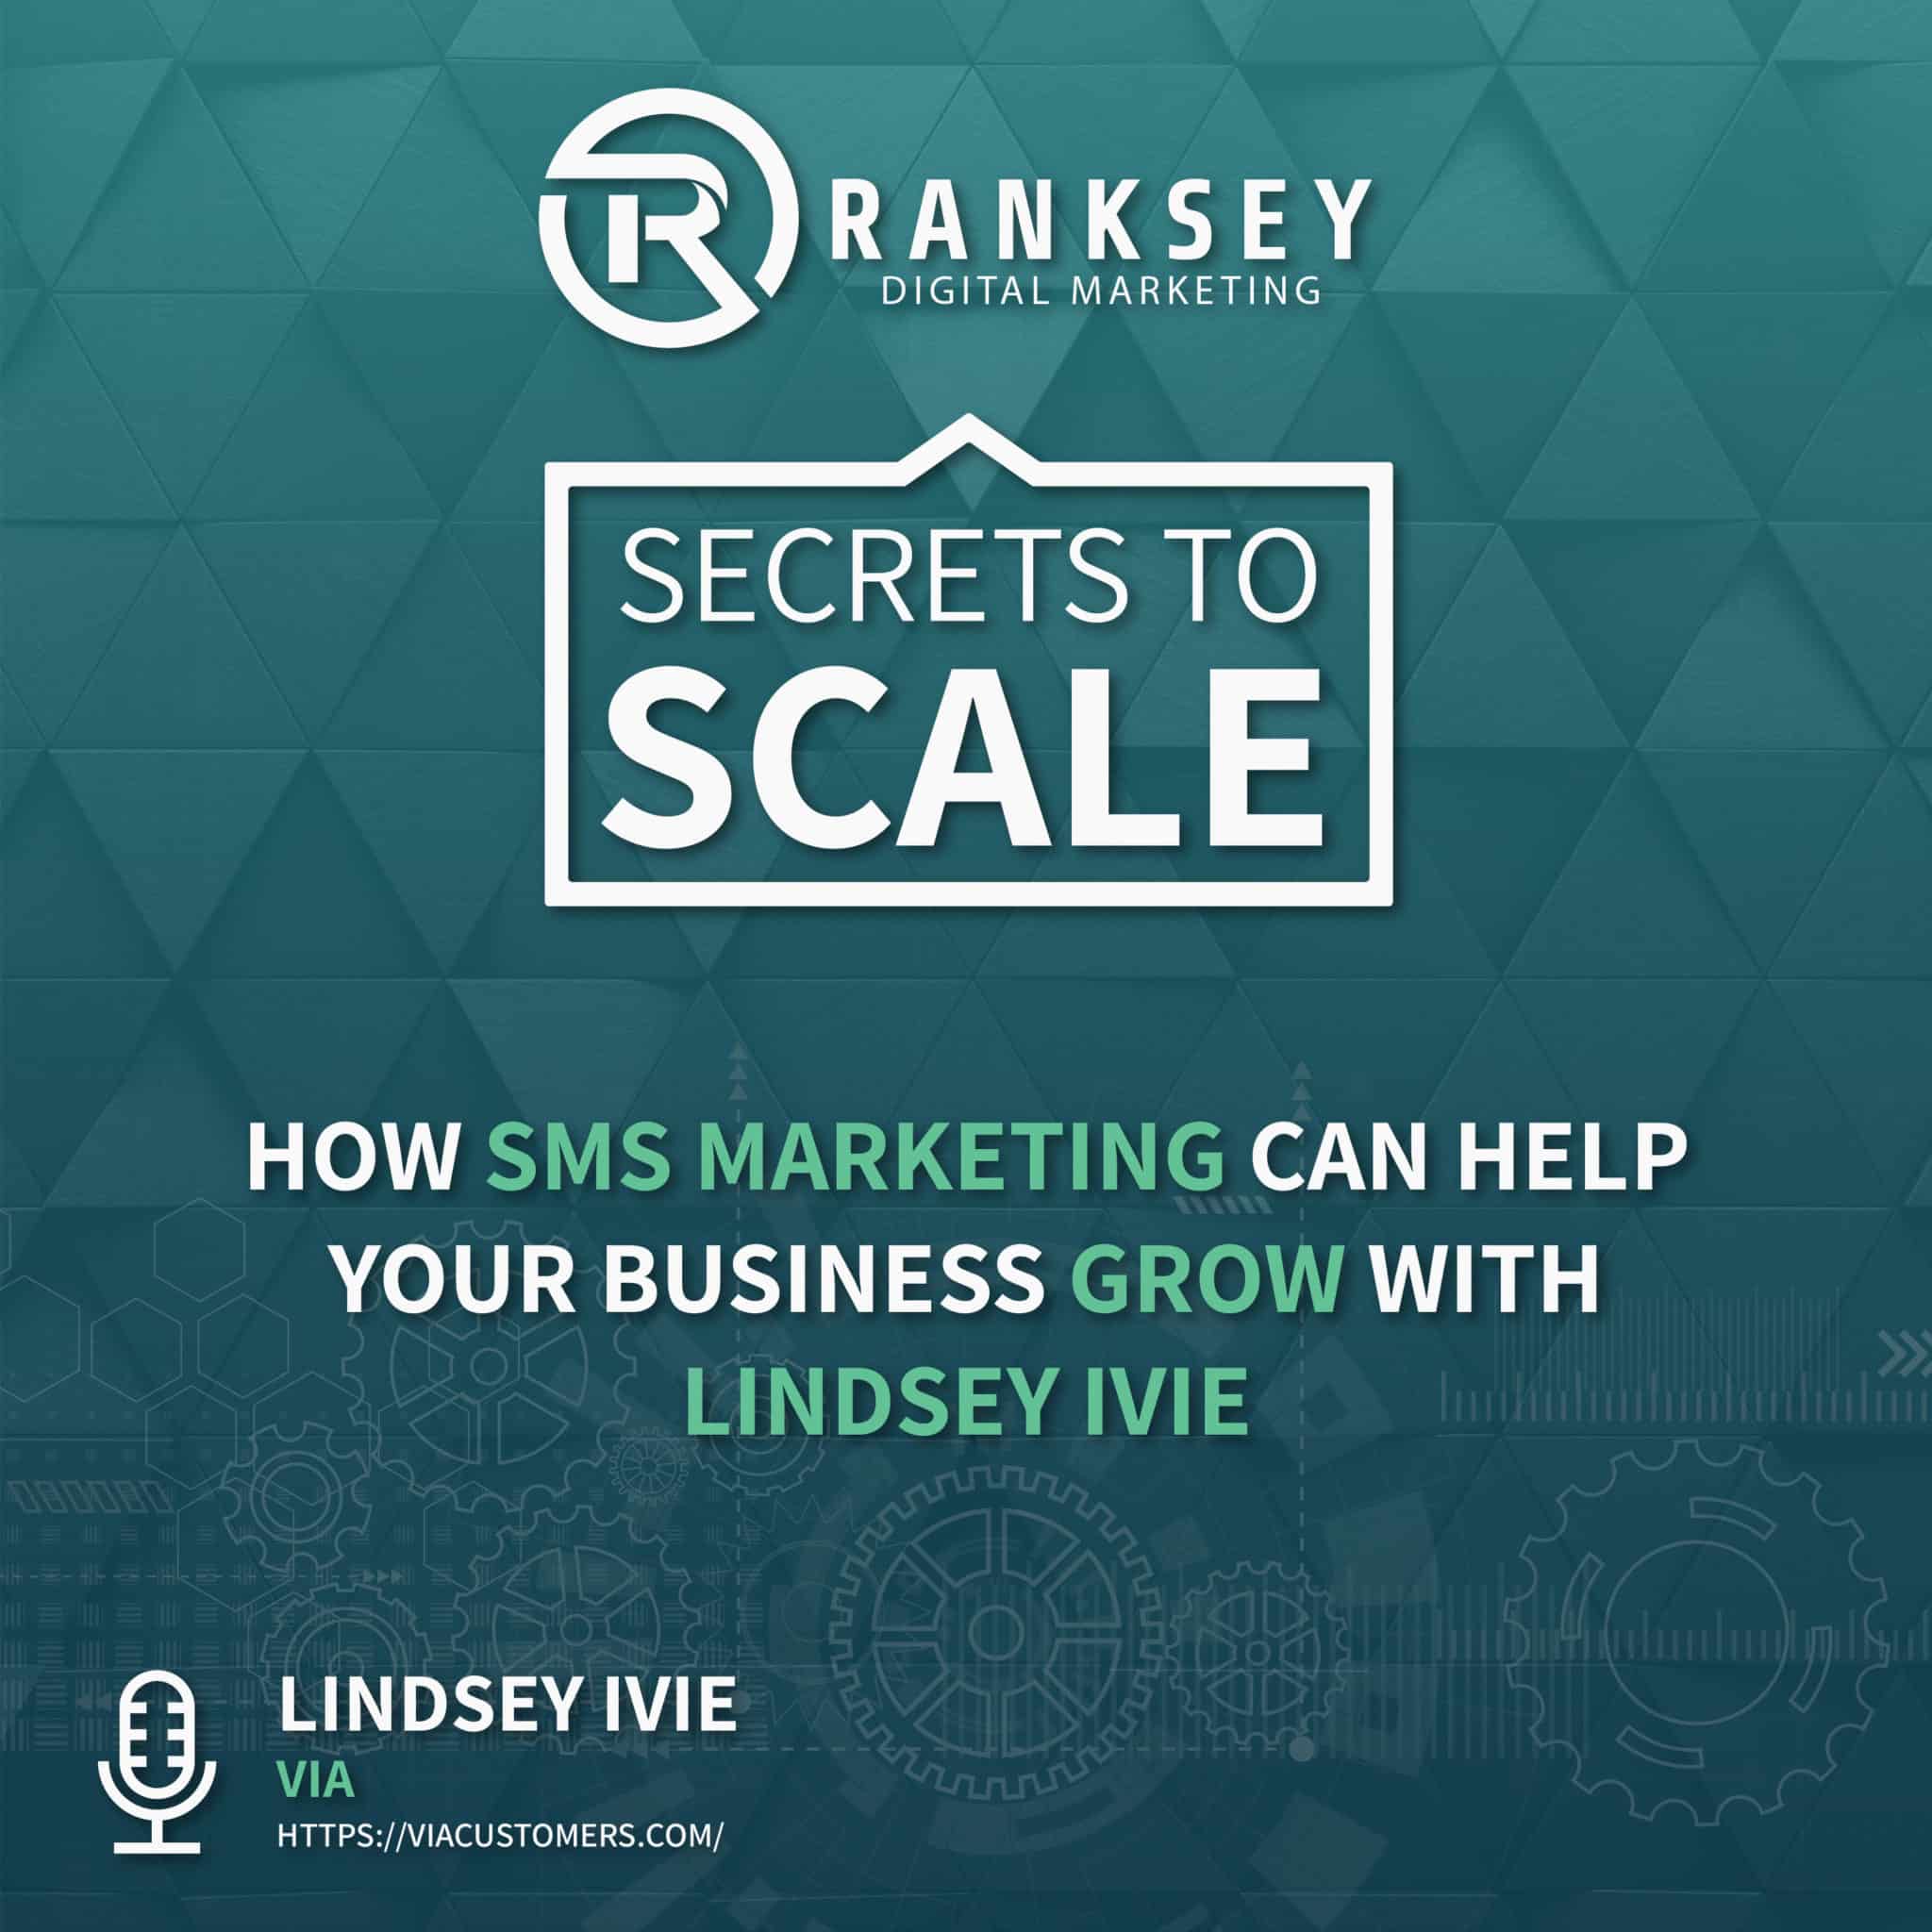 025 - How SMS Marketing Can Help Your Business Grow With Lindsey Ivie